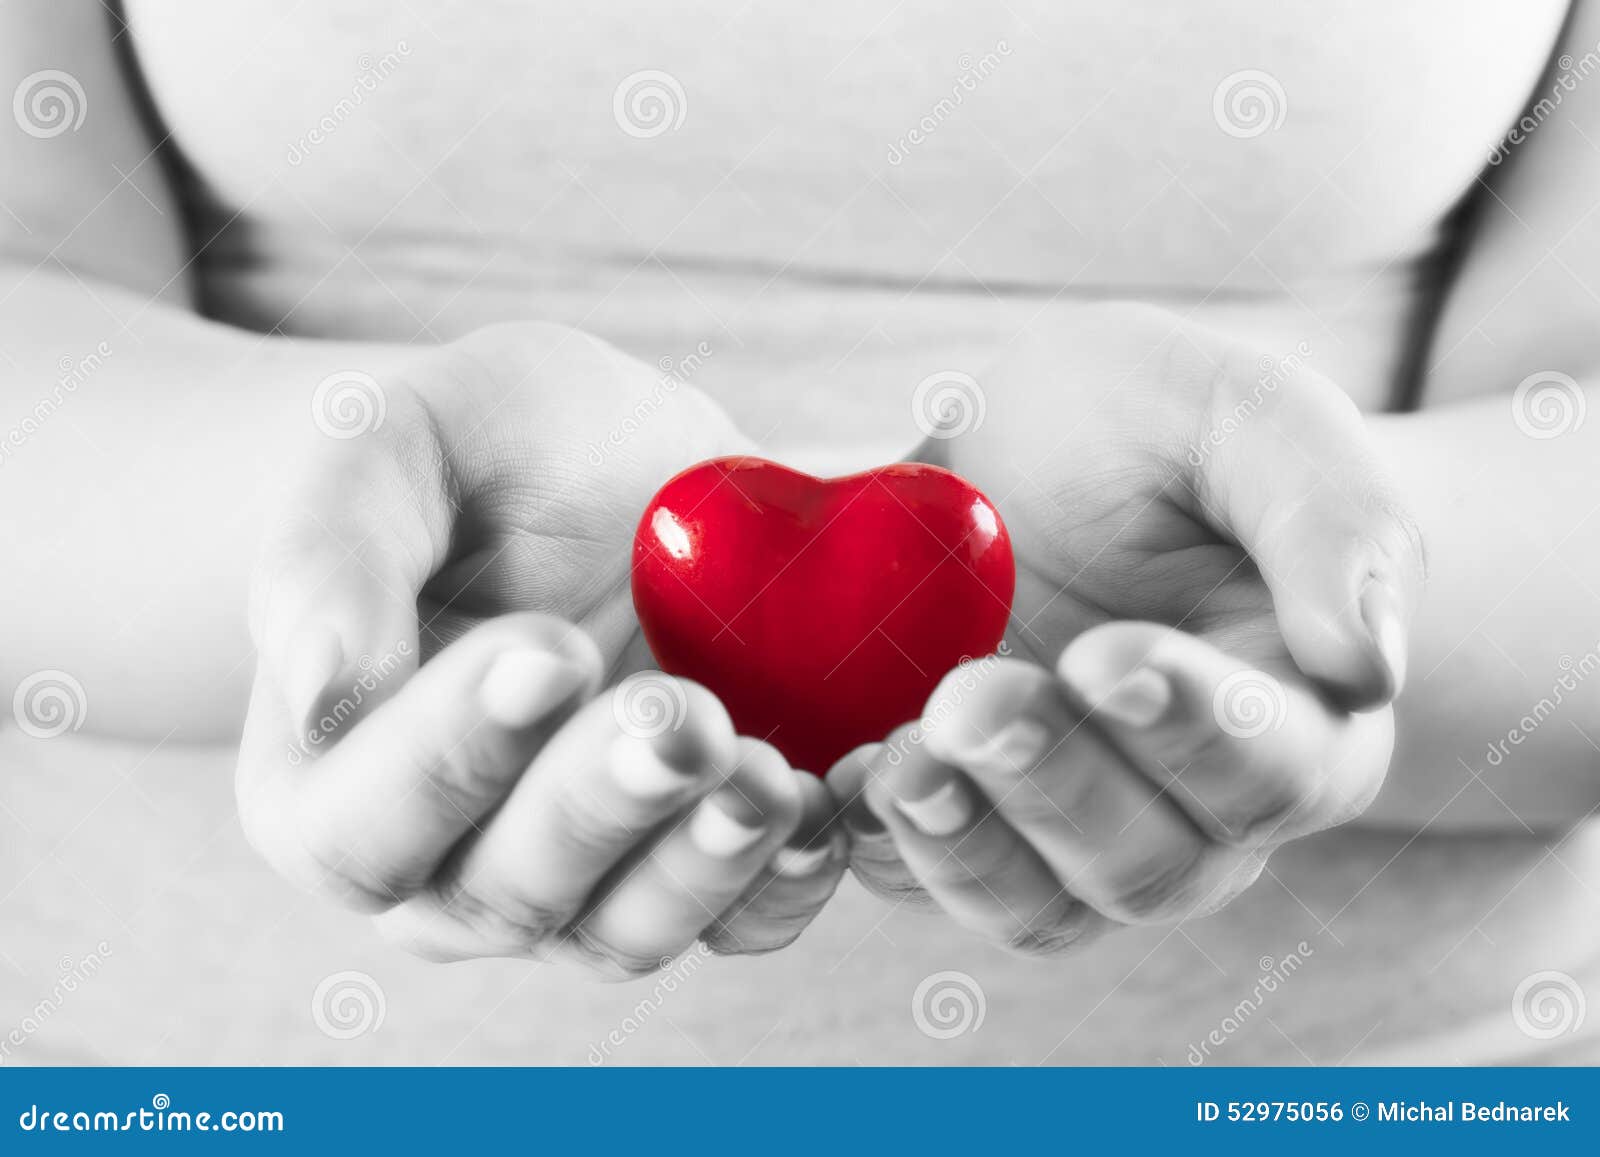 heart in woman hands. love giving, care, health, protection.